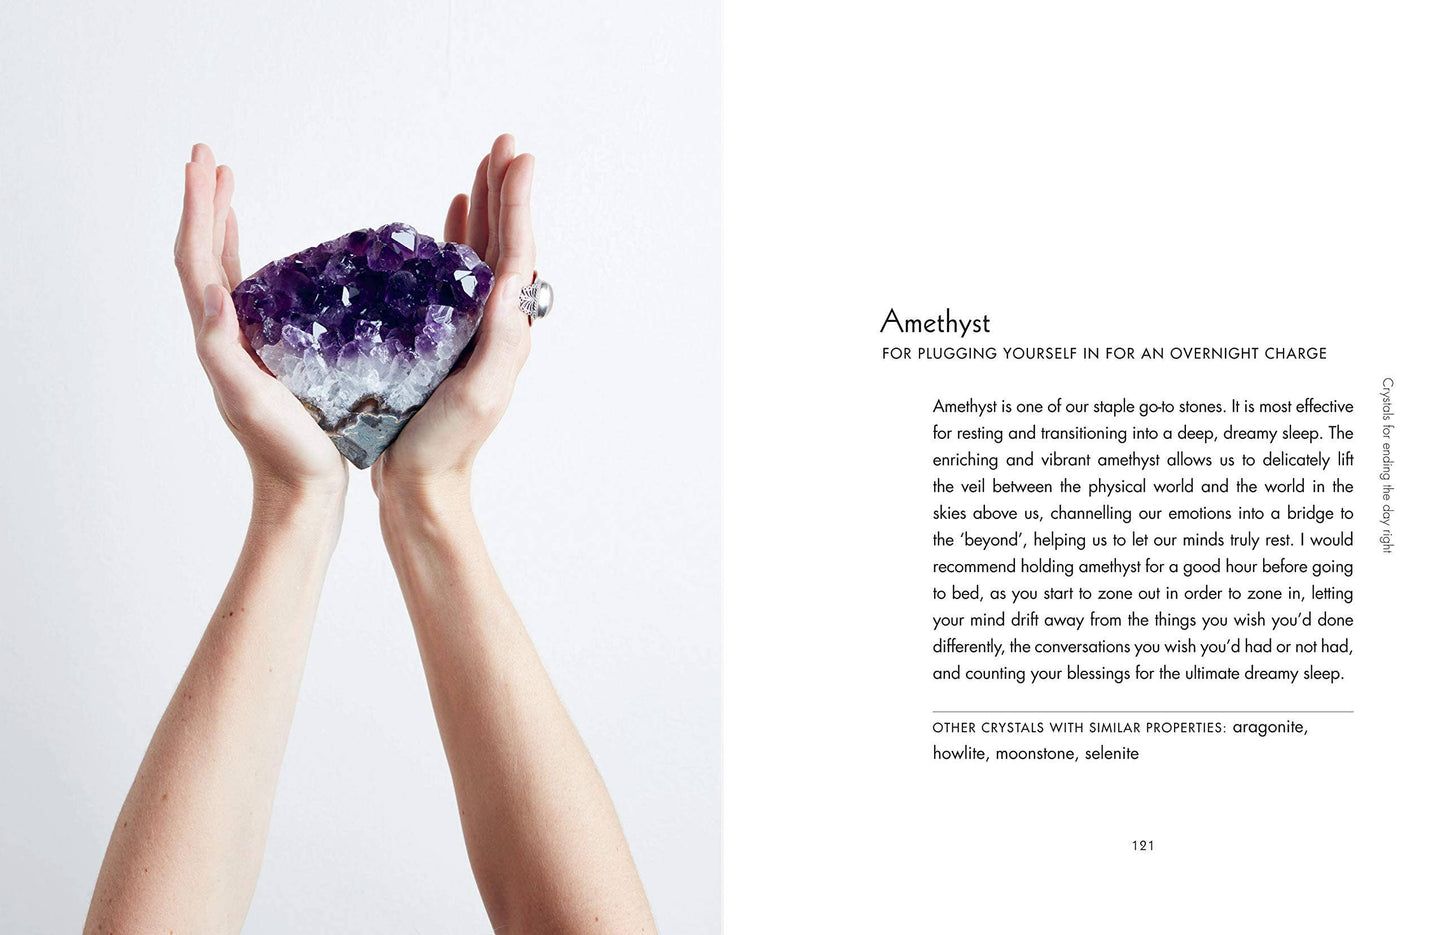 Power of Crystal Healing by Emma Lucy Knowles